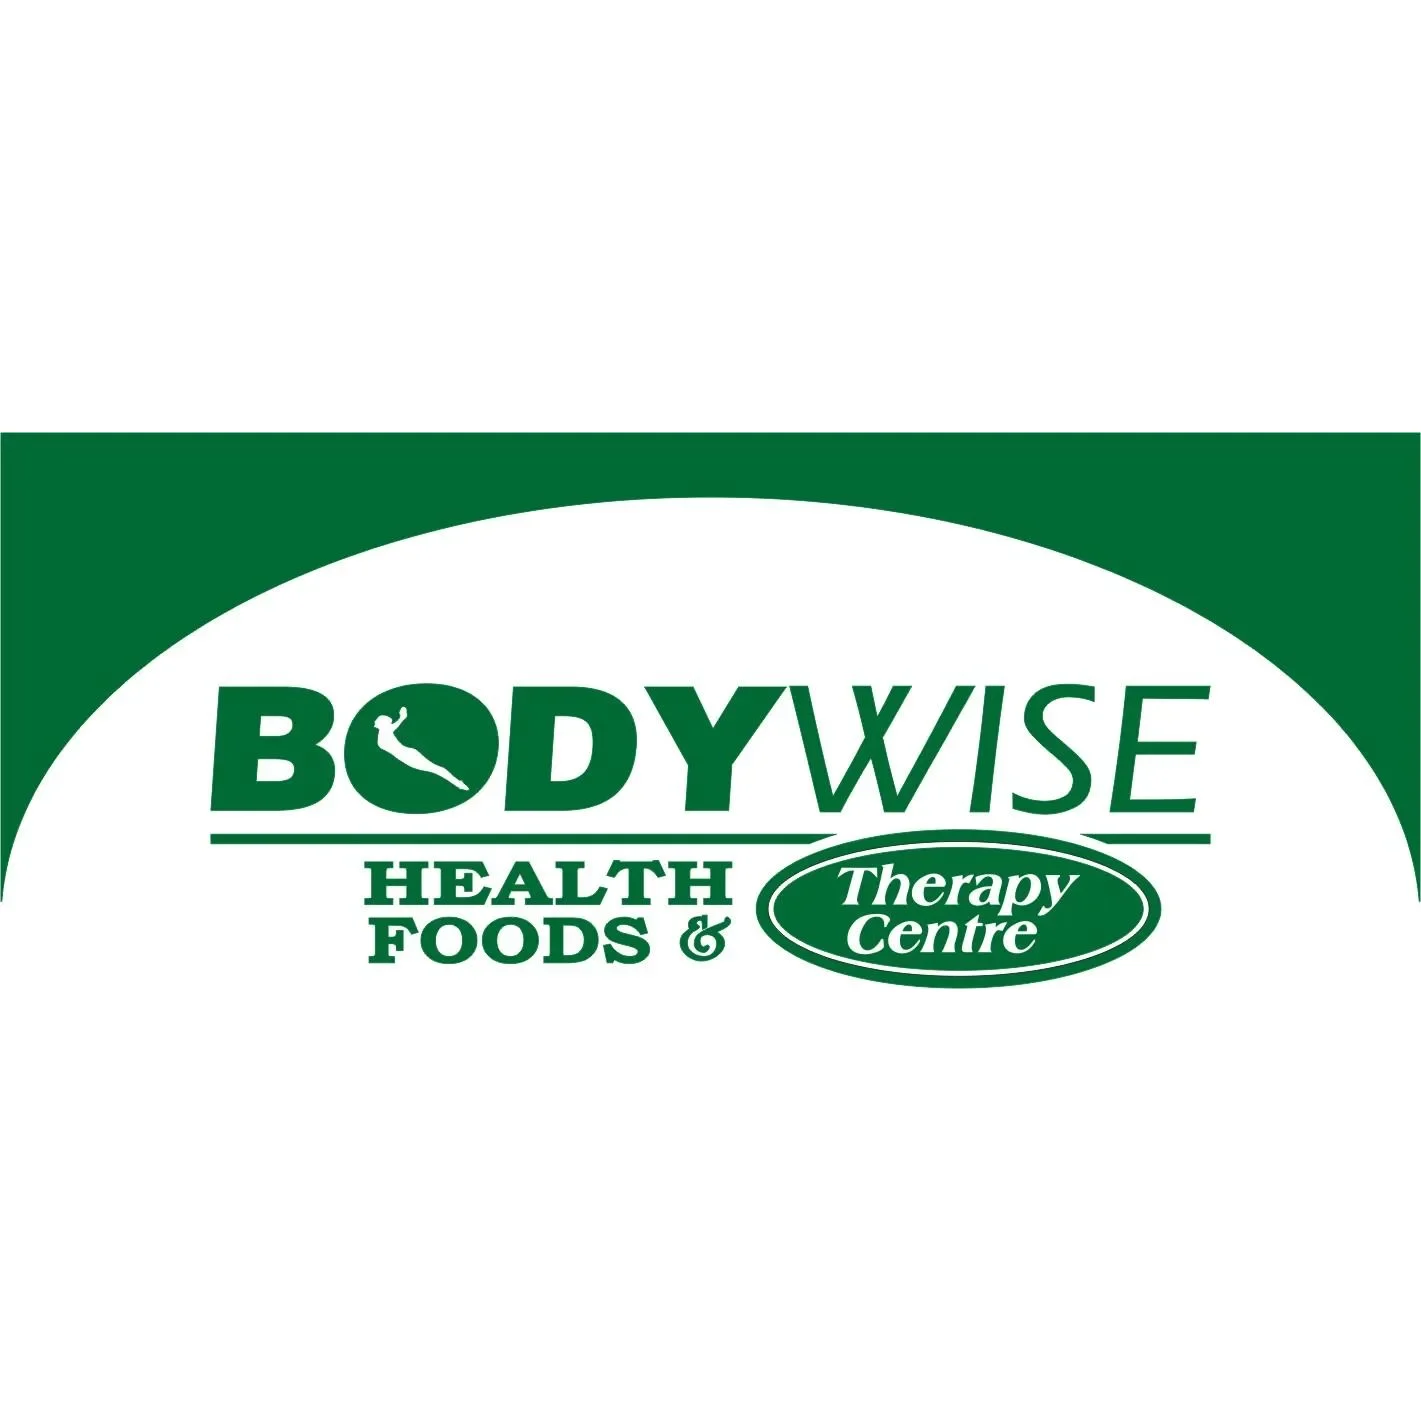 Bodywise Health Foods - Henley-On-Thames, Oxfordshire RG9 2AA - 01491 573764 | ShowMeLocal.com